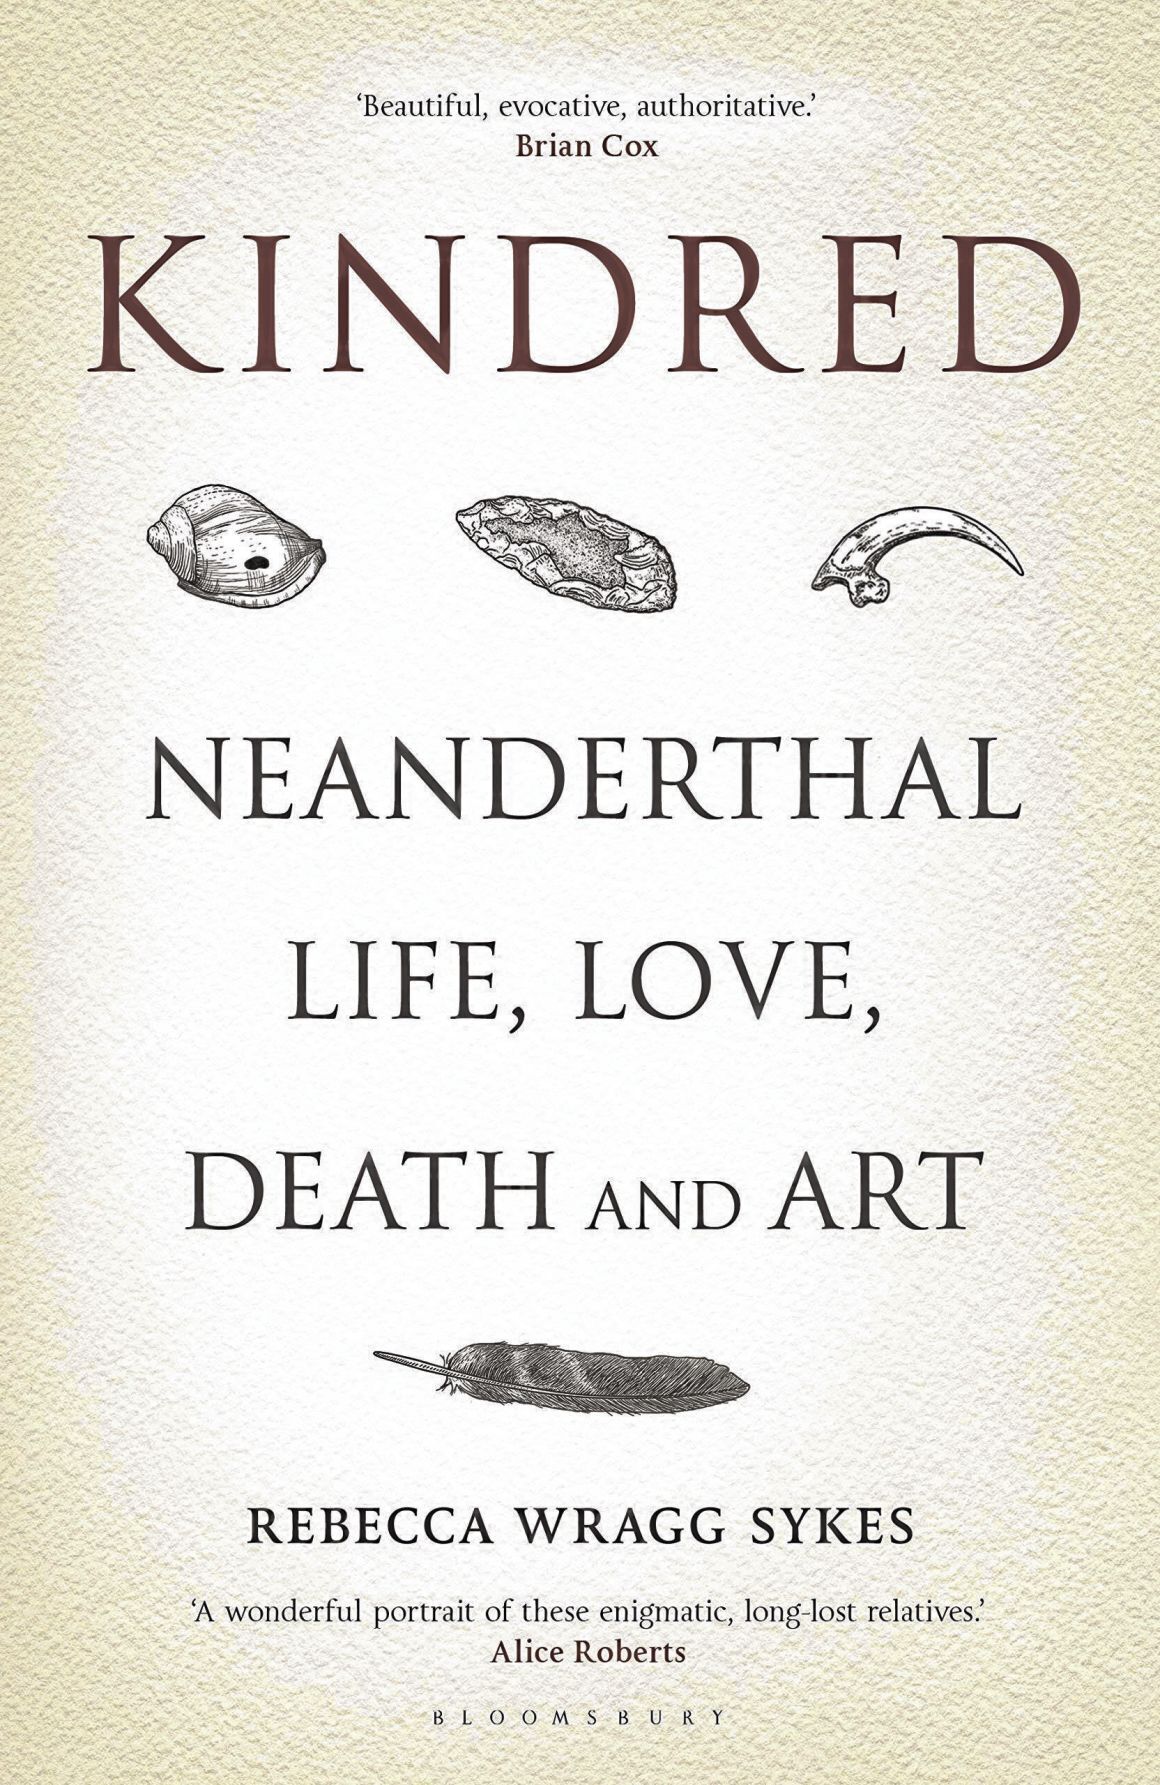 kindred book neanderthal